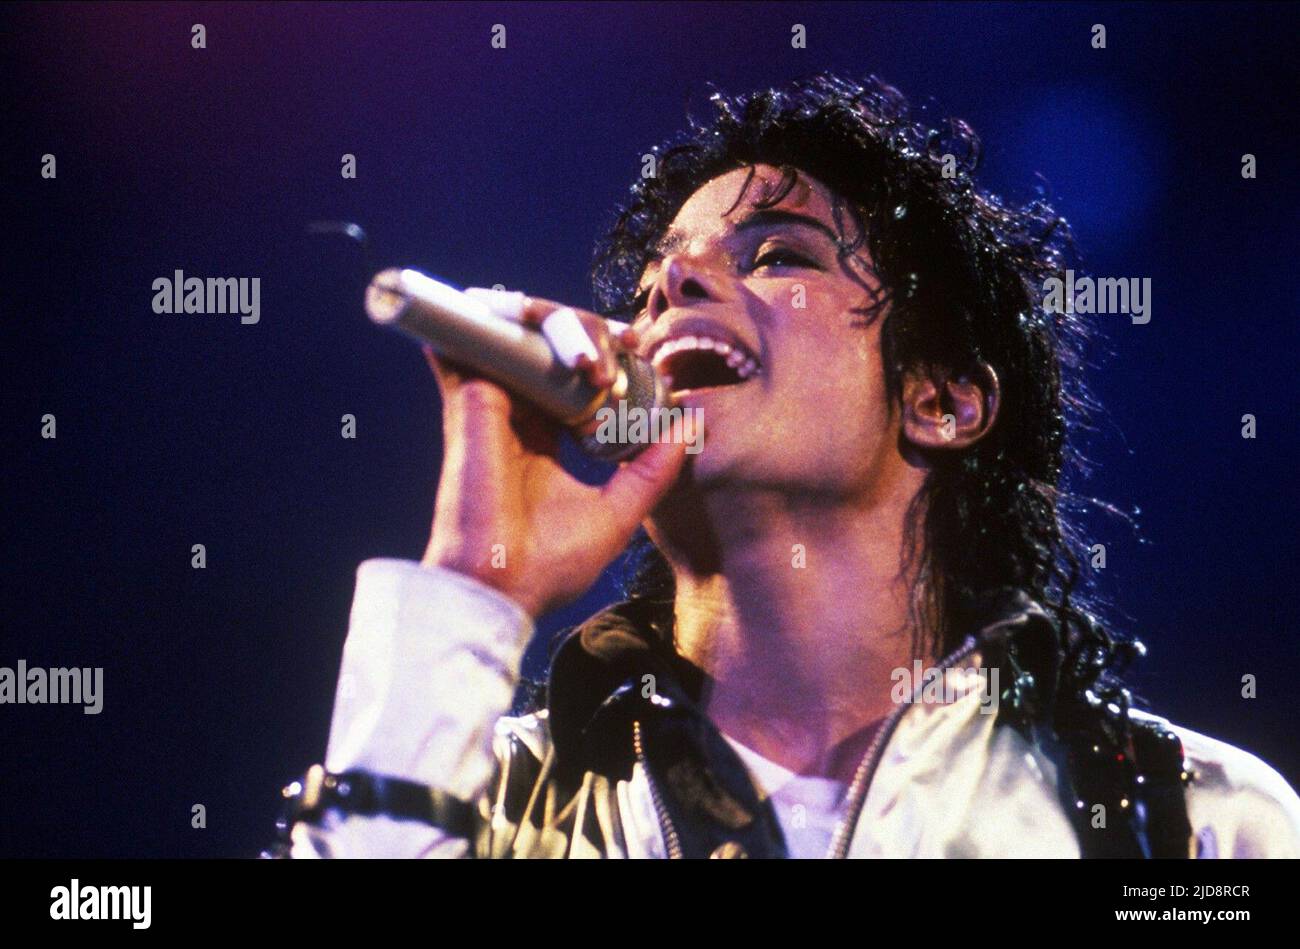 MICHAEL JACKSON, MICHAEL JACKSON: THE INSIDE STORY - WHAT KILLED THE KING OF POP?, 2010, Foto Stock